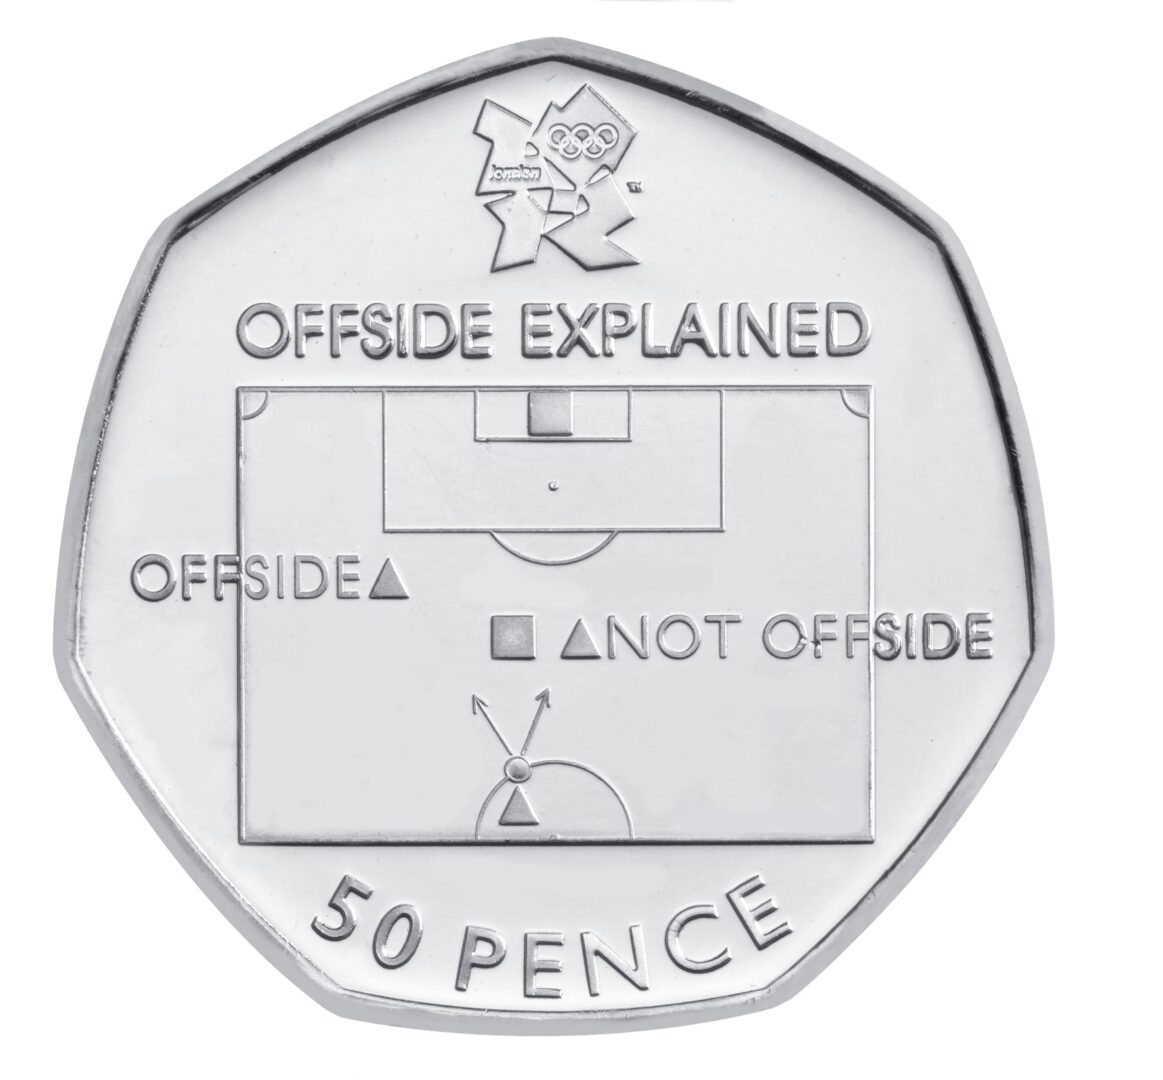 The offside rule 50p could be worth over £10